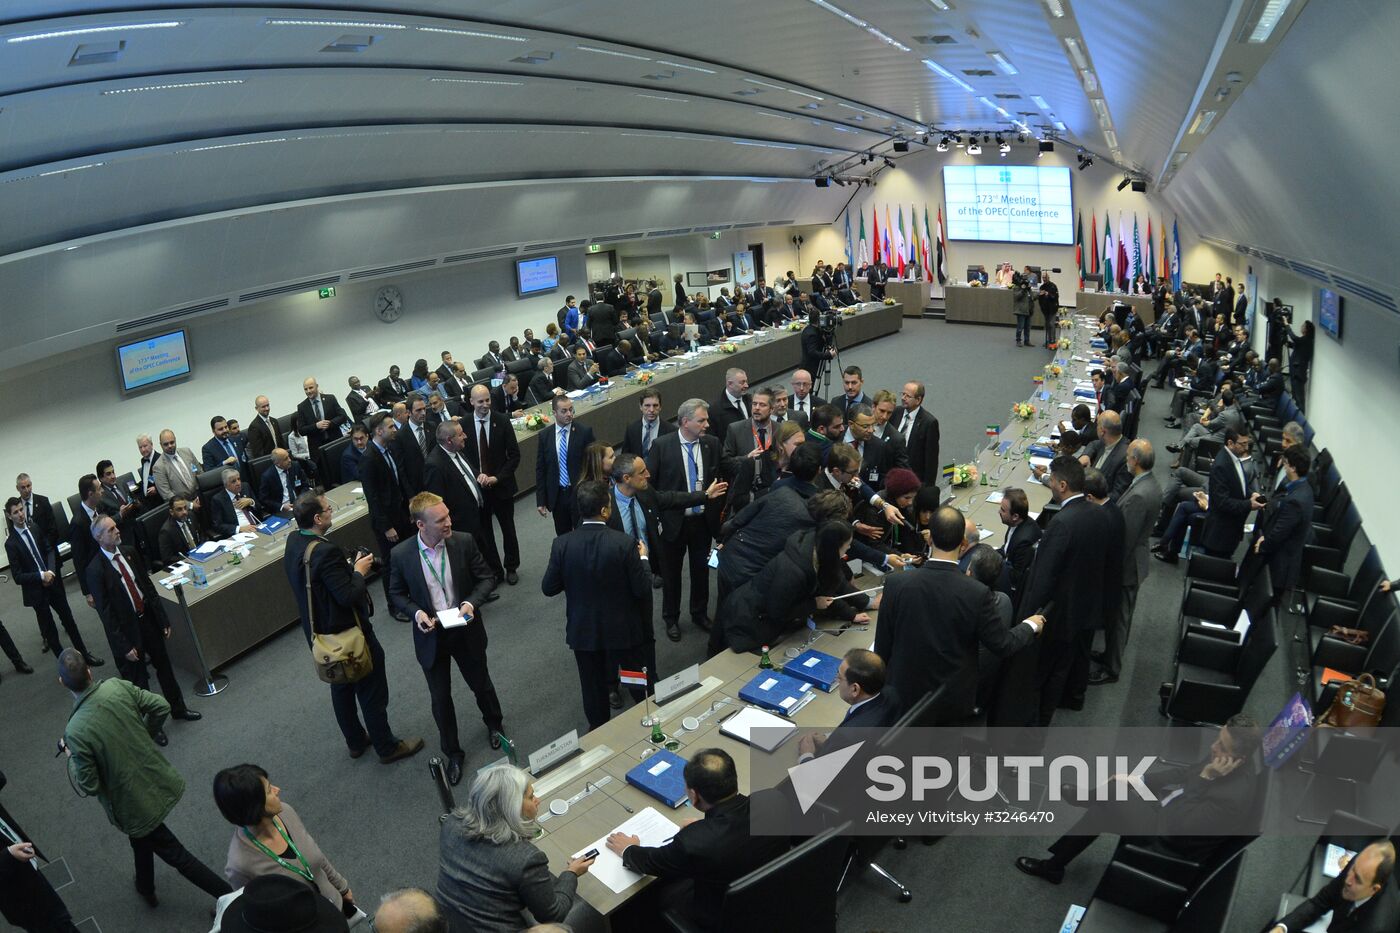 Meeting of Organization of the Petroleum Exporting Countries (OPEC)